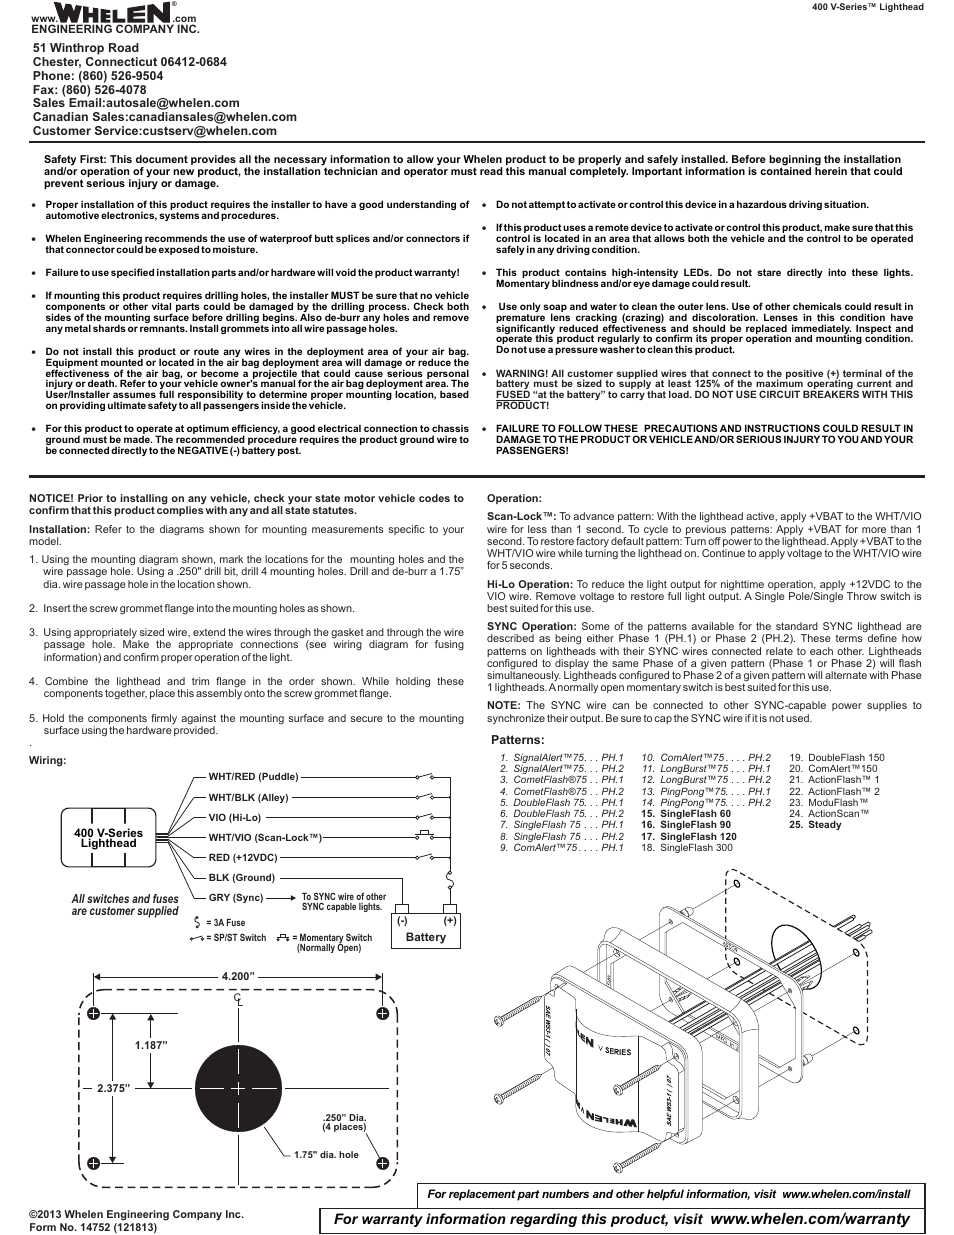 Whelen 4V3A User Manual | 1 page